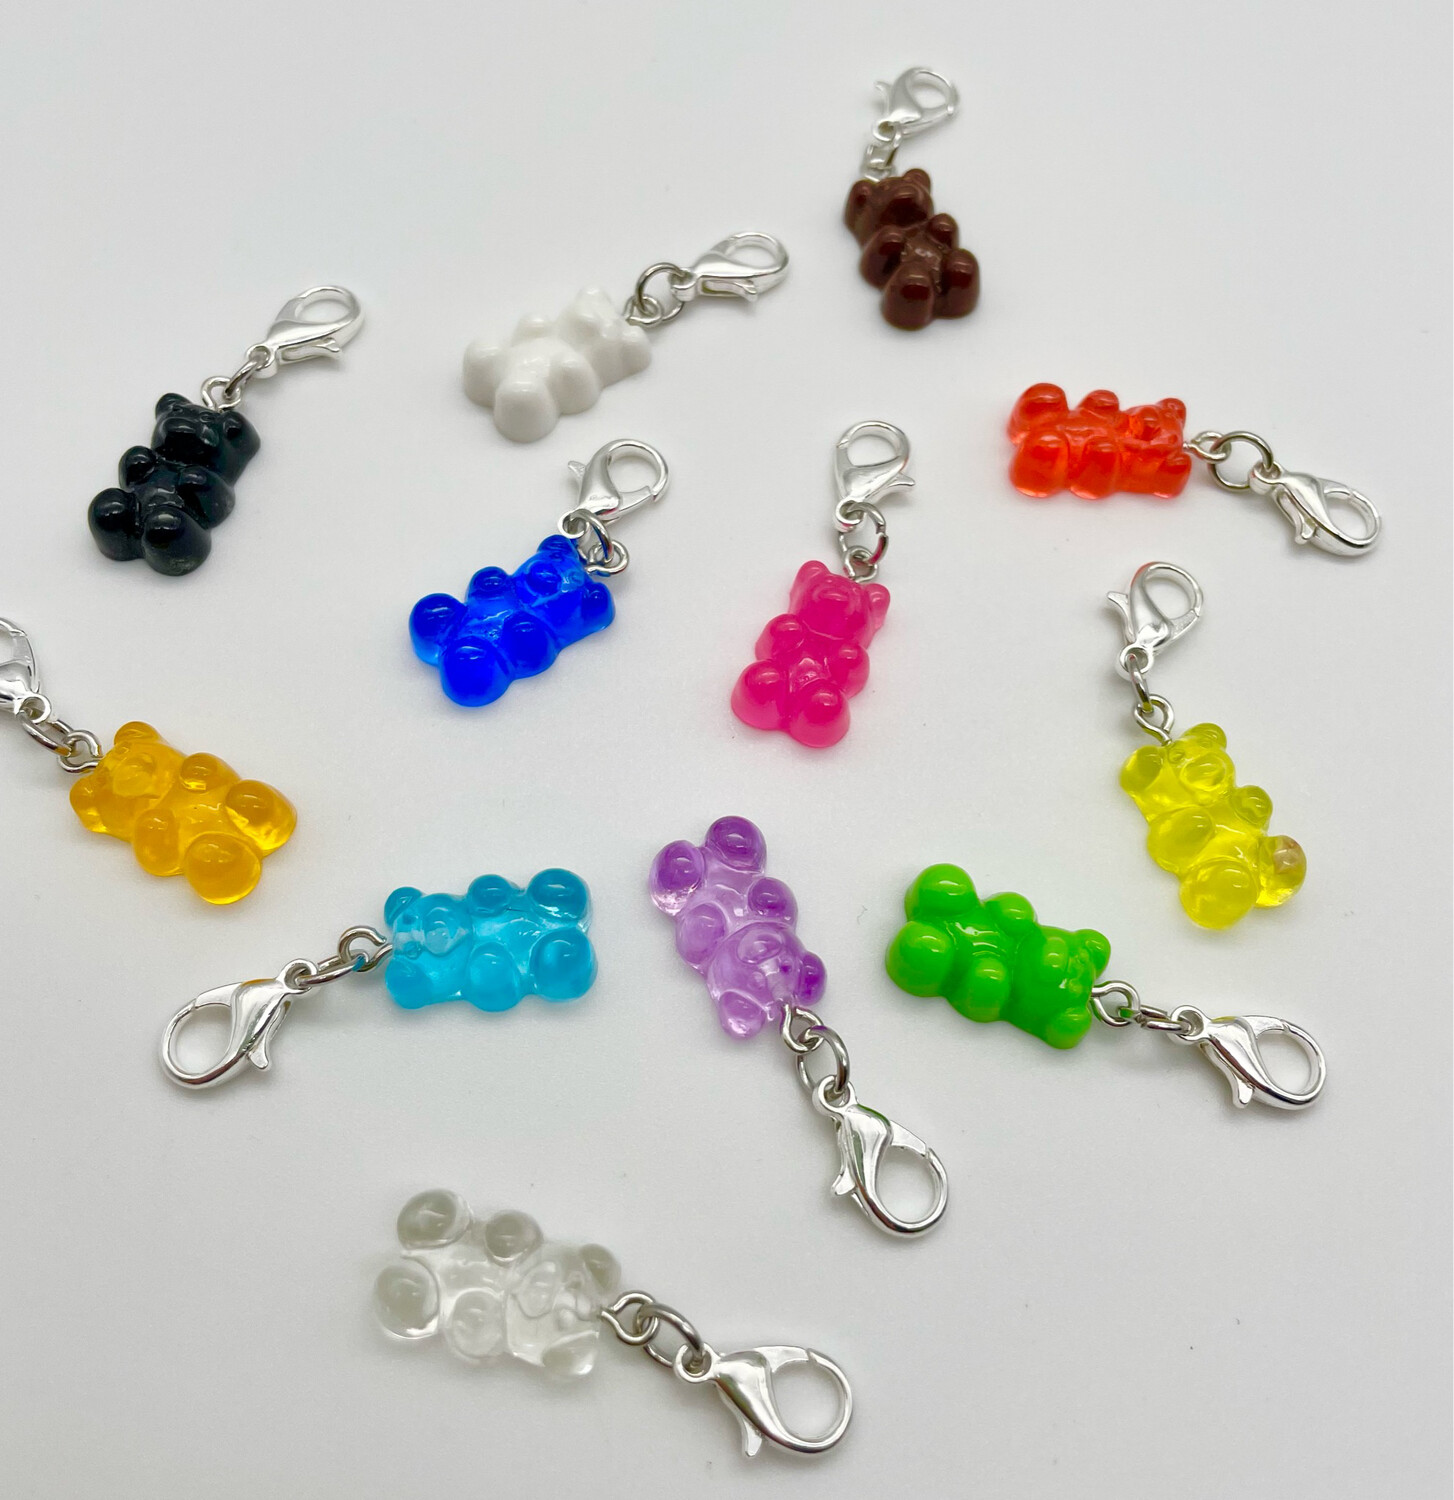 Resin Jelly Bears Stitch Markers - pack of 5 | Our Little Craft Co | UK  Crochet & Craft Supplies Store